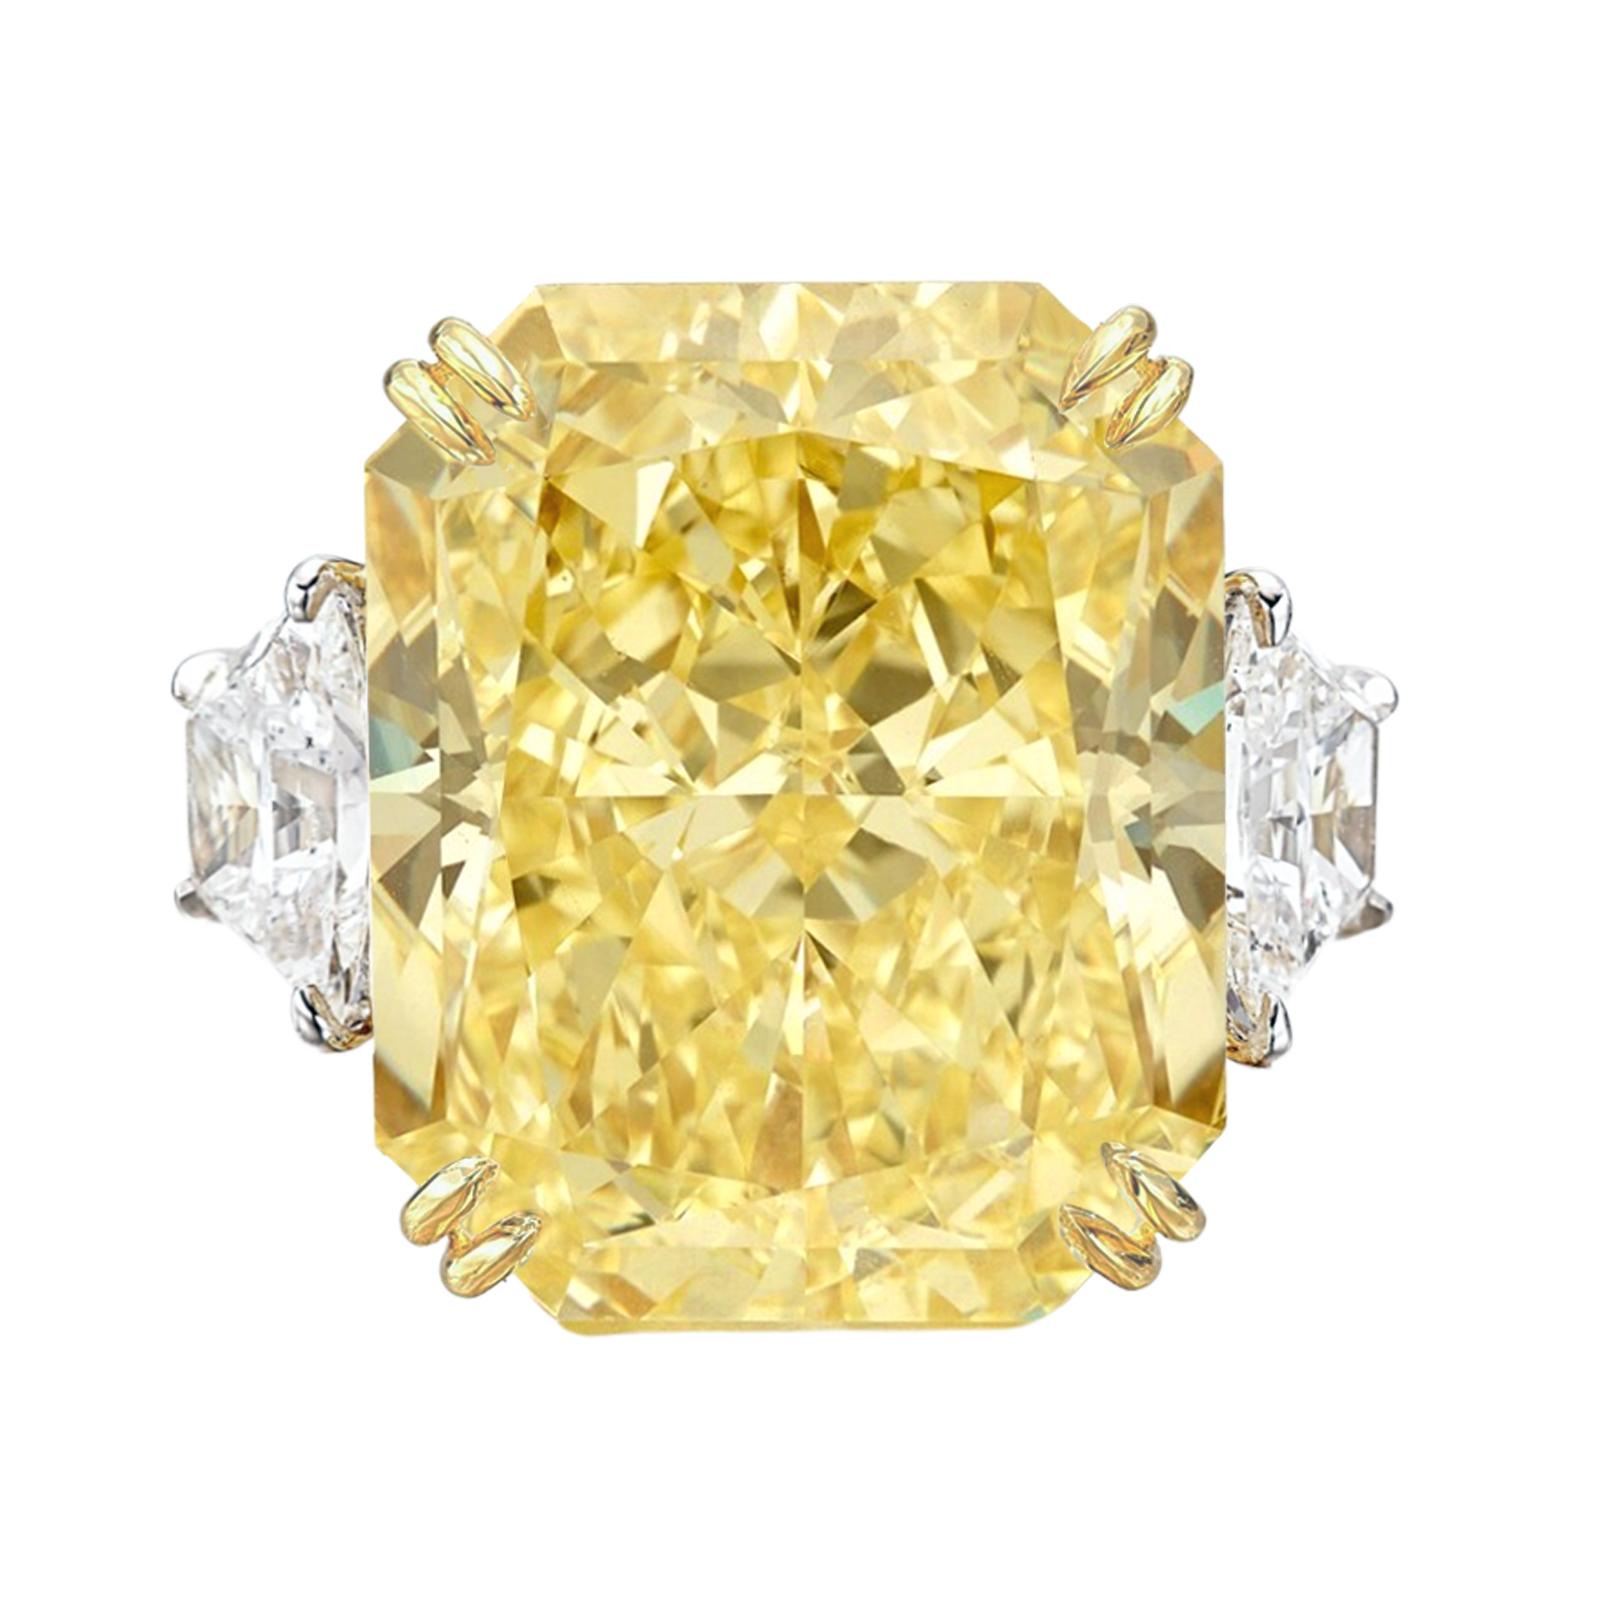 Modern GIA Certified 10.35 Carat Fancy Yellow Clarity Radiant Diamond Ring For Sale